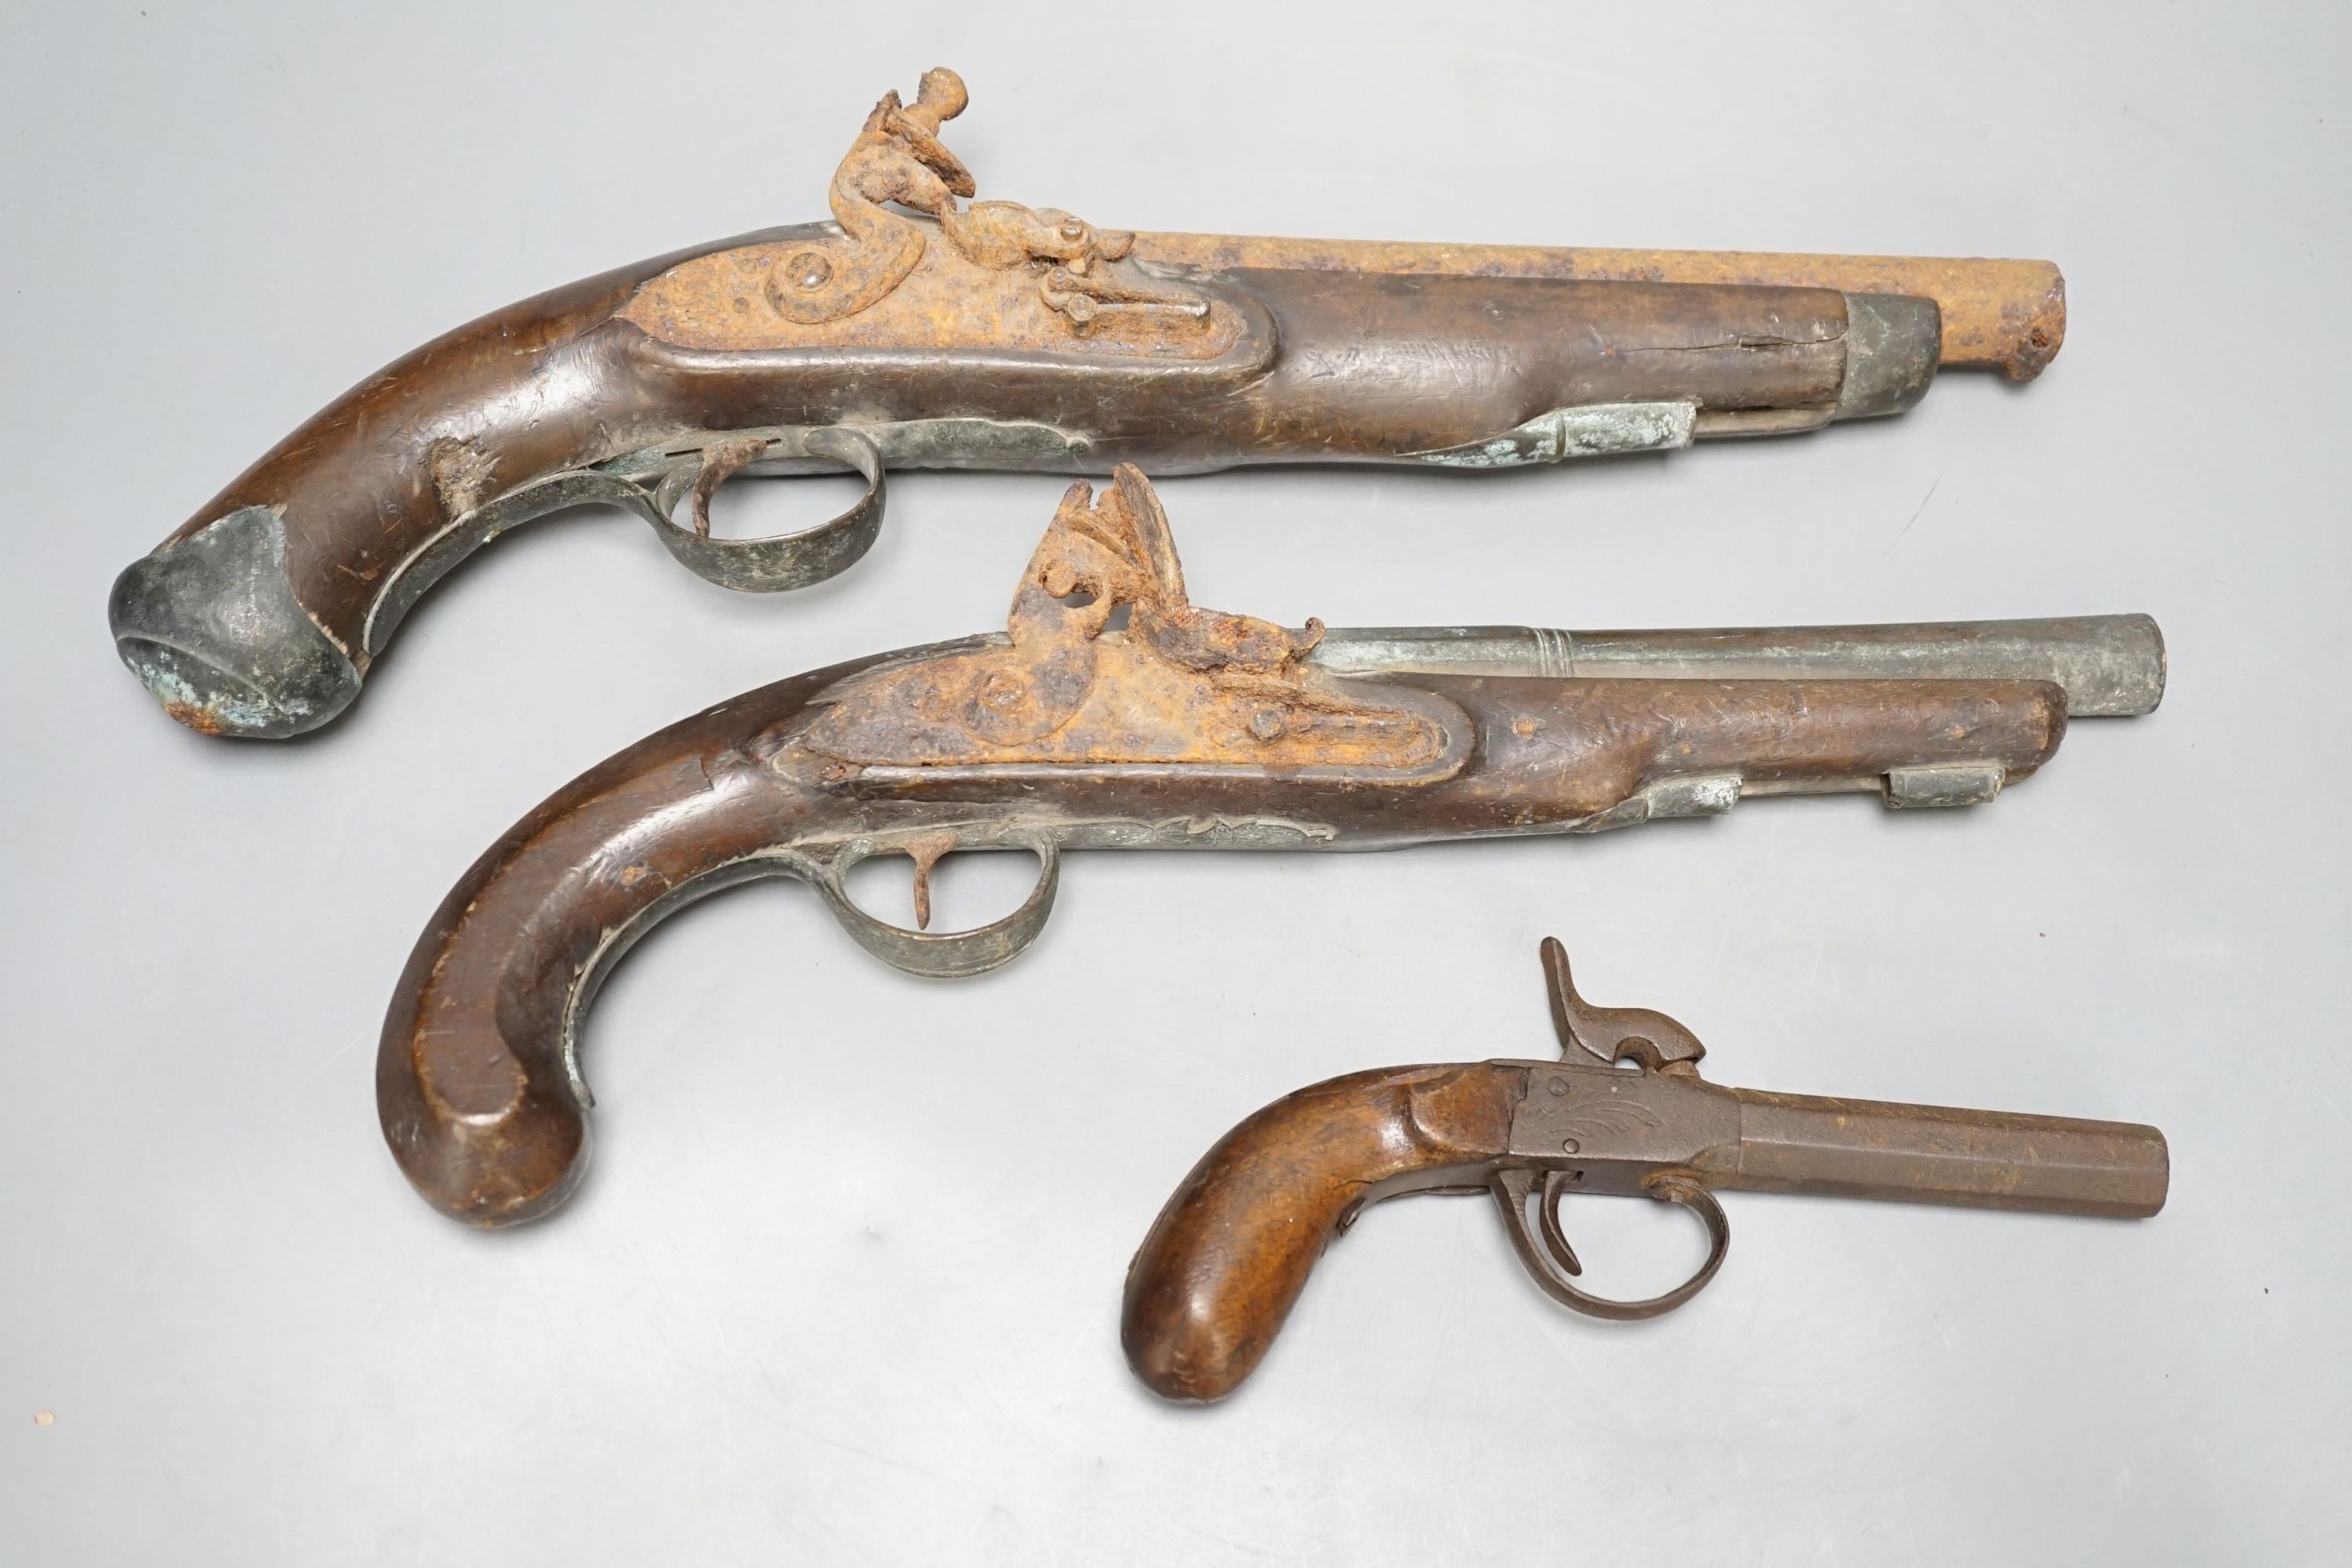 Two 19th century flintlock pistols and a pocket pistol, largest 40 cms long.